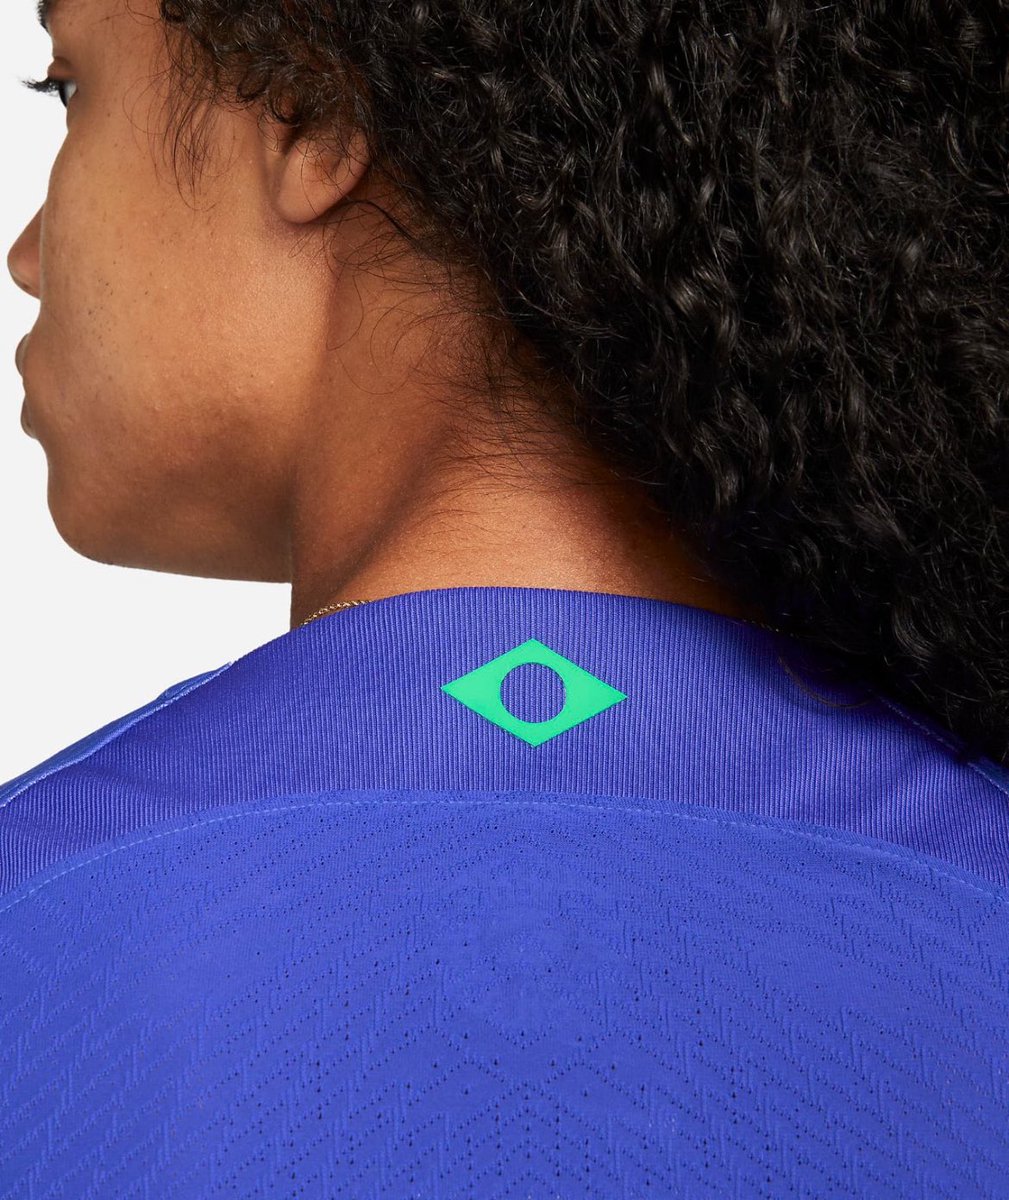 @CamillaTominey This is Nike's Brazil kit. It may be a bad idea, but the argument about whether they would do it to any other country could be checked by asking them, or reading the online copy about the 2024 kits